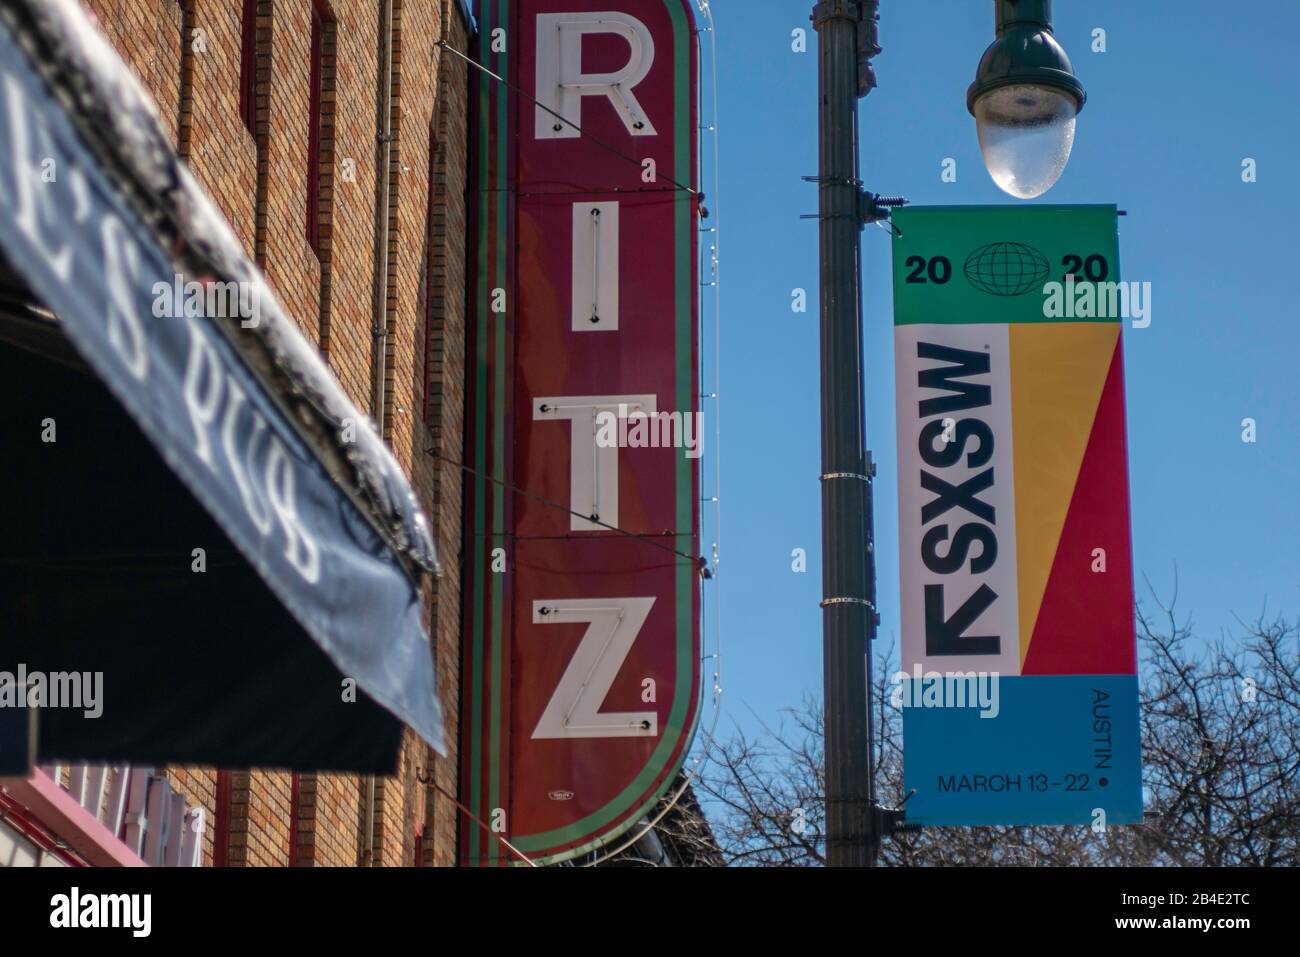 Austin, Texas - March 6, 2020: 2020 South by Southwest (SXSW) conference and festival banner near the Ritz Alamo Drafthouse theater Stock Photo